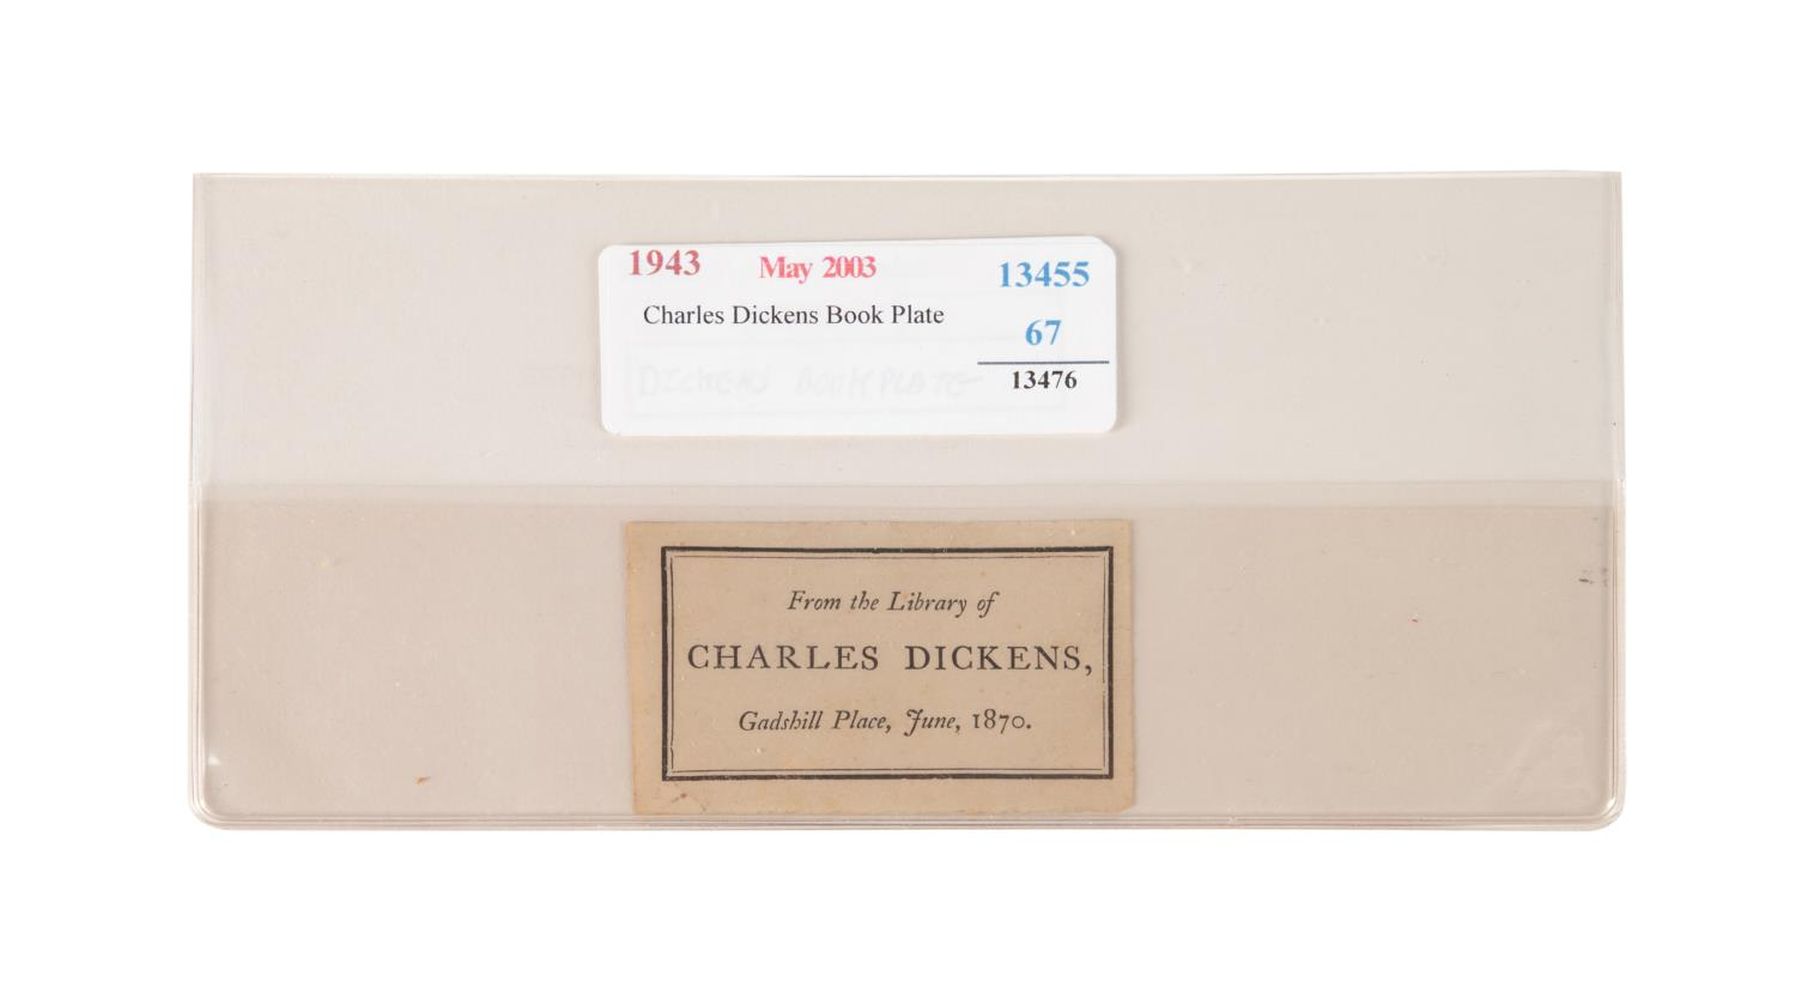 CHARLES DICKENS, SALES LABEL FROM